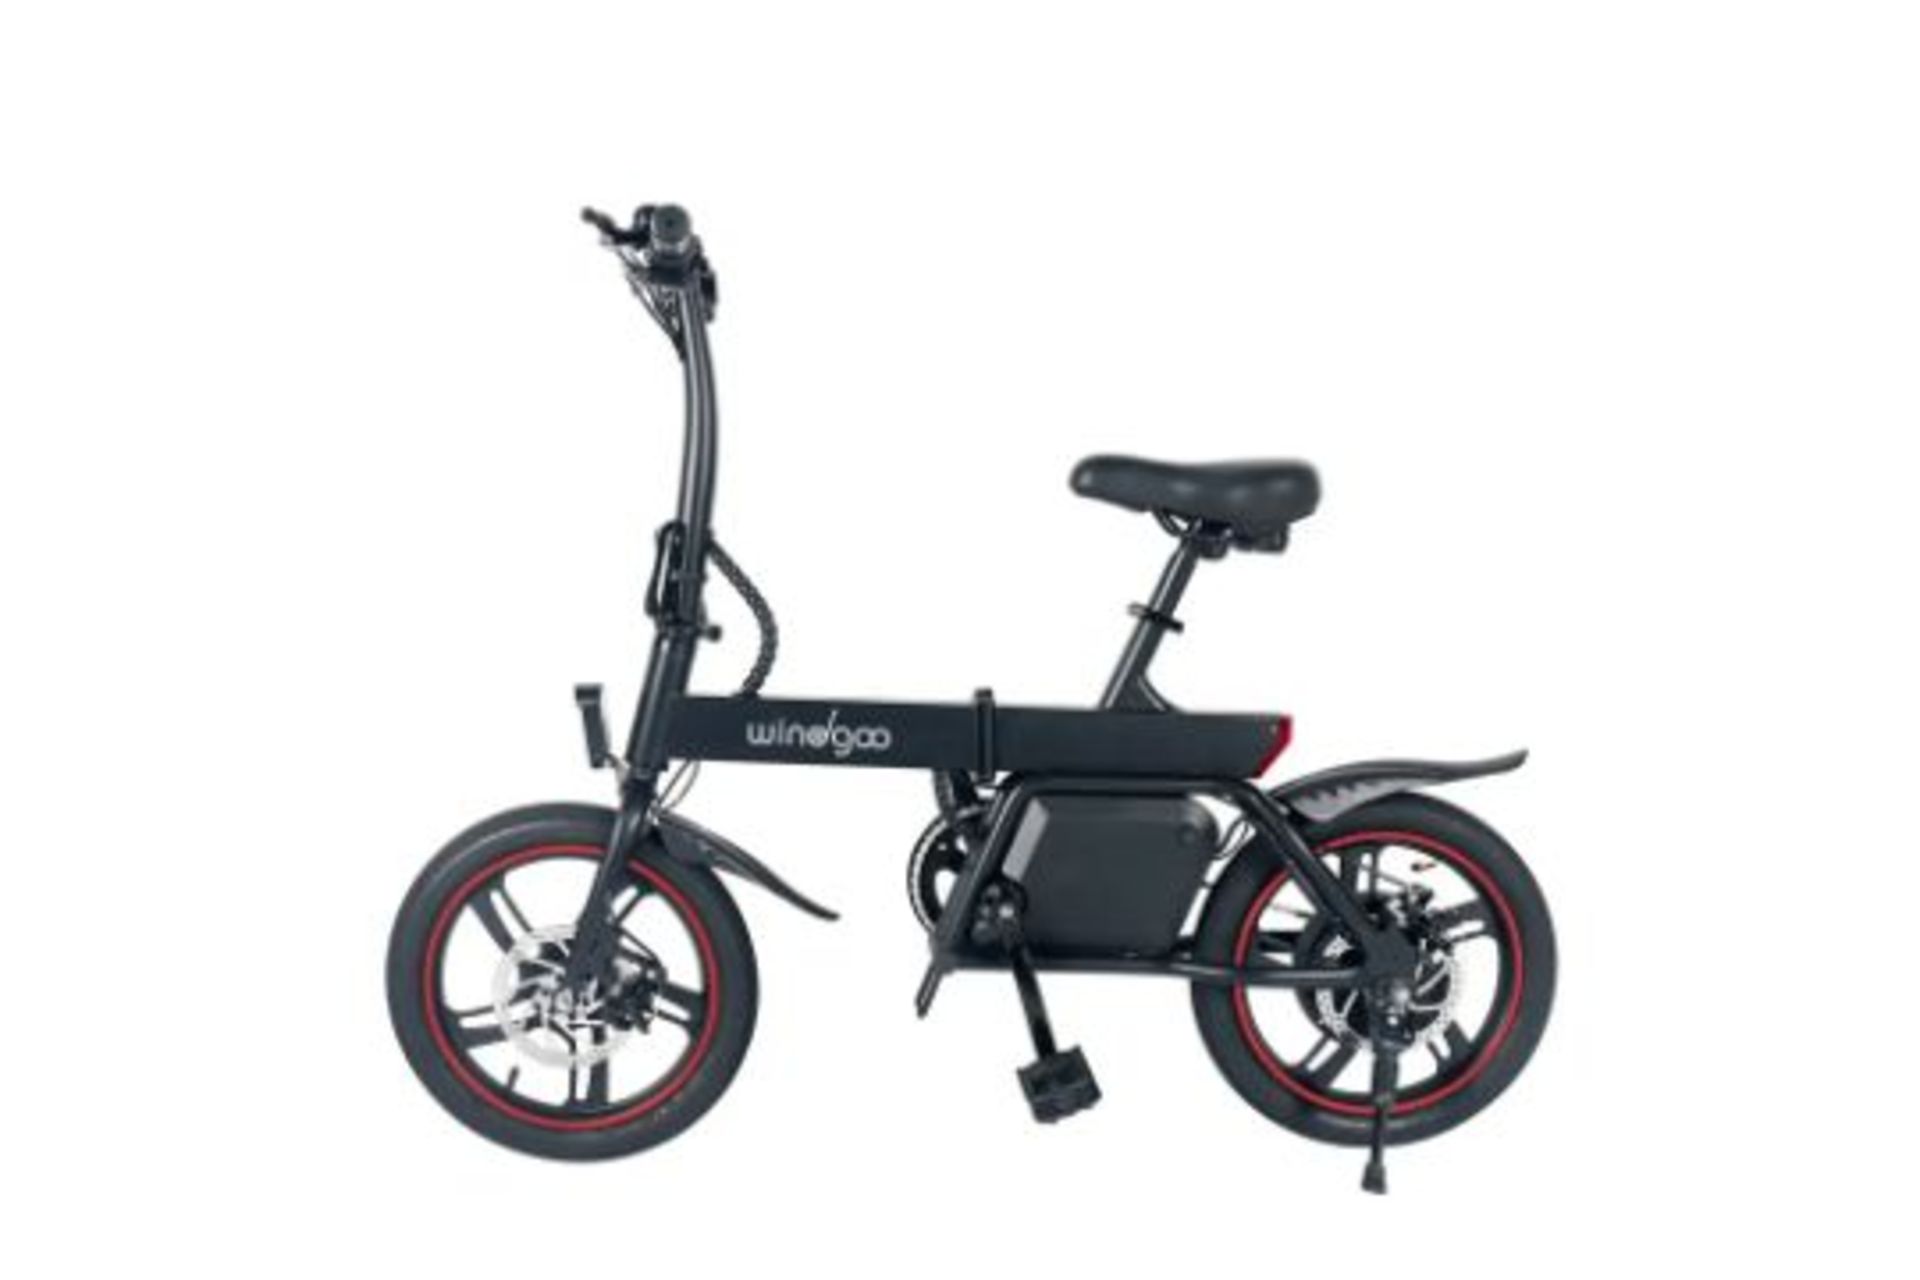 5 X Windgoo B20 Pro Electric Bike. RRP £1,100.99. With 16-inch-wide tires and a frame of